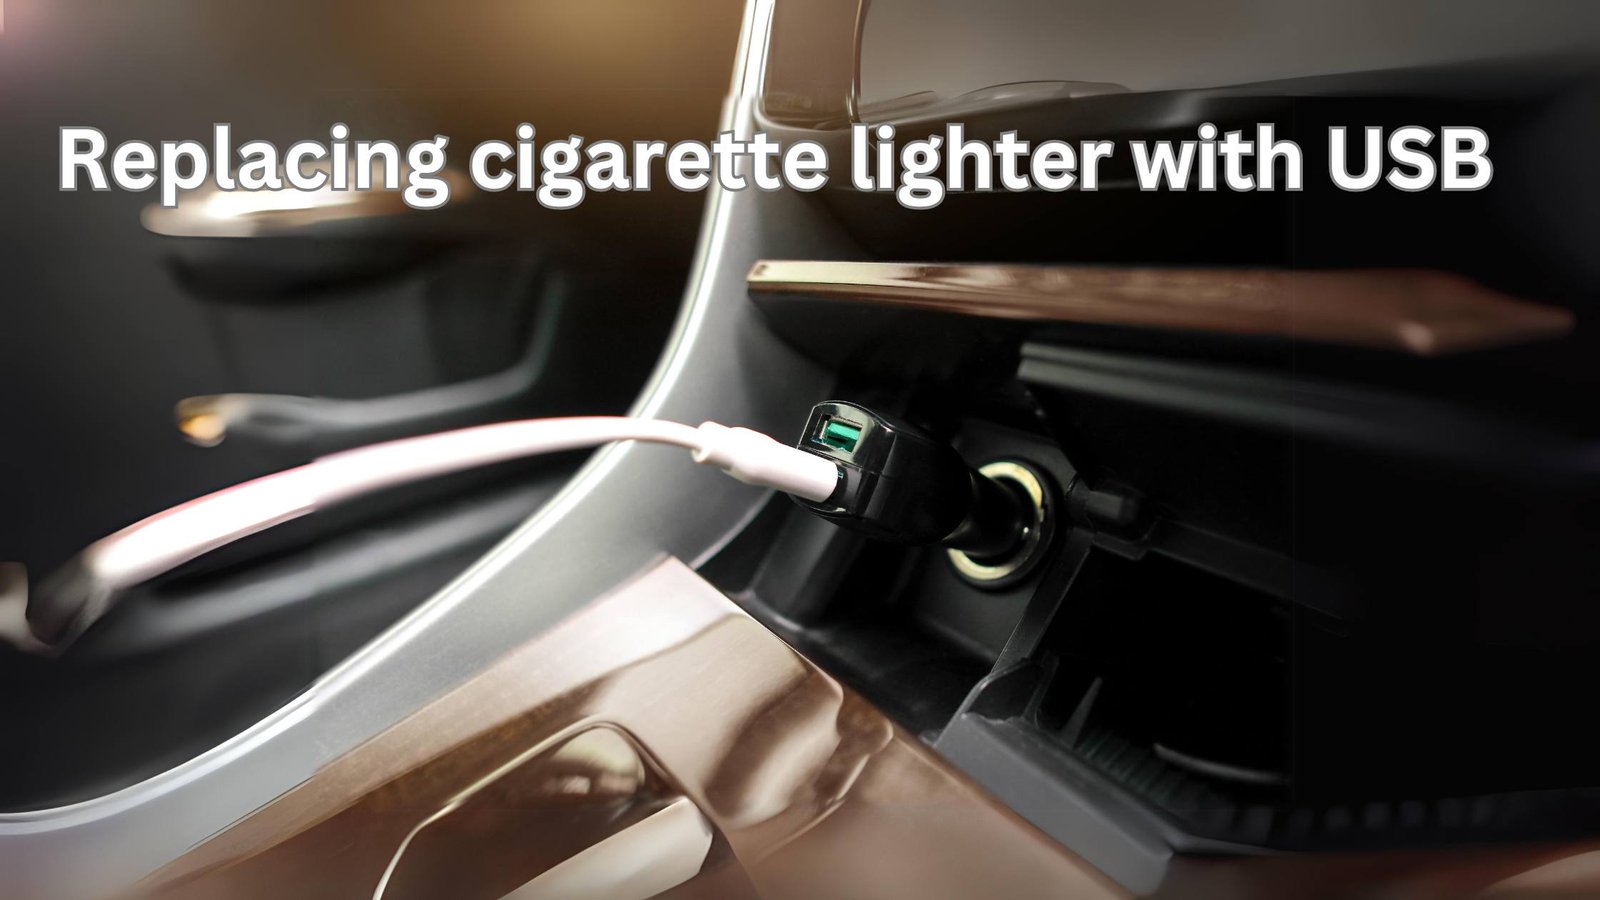 Replacing cigarette lighter with USB